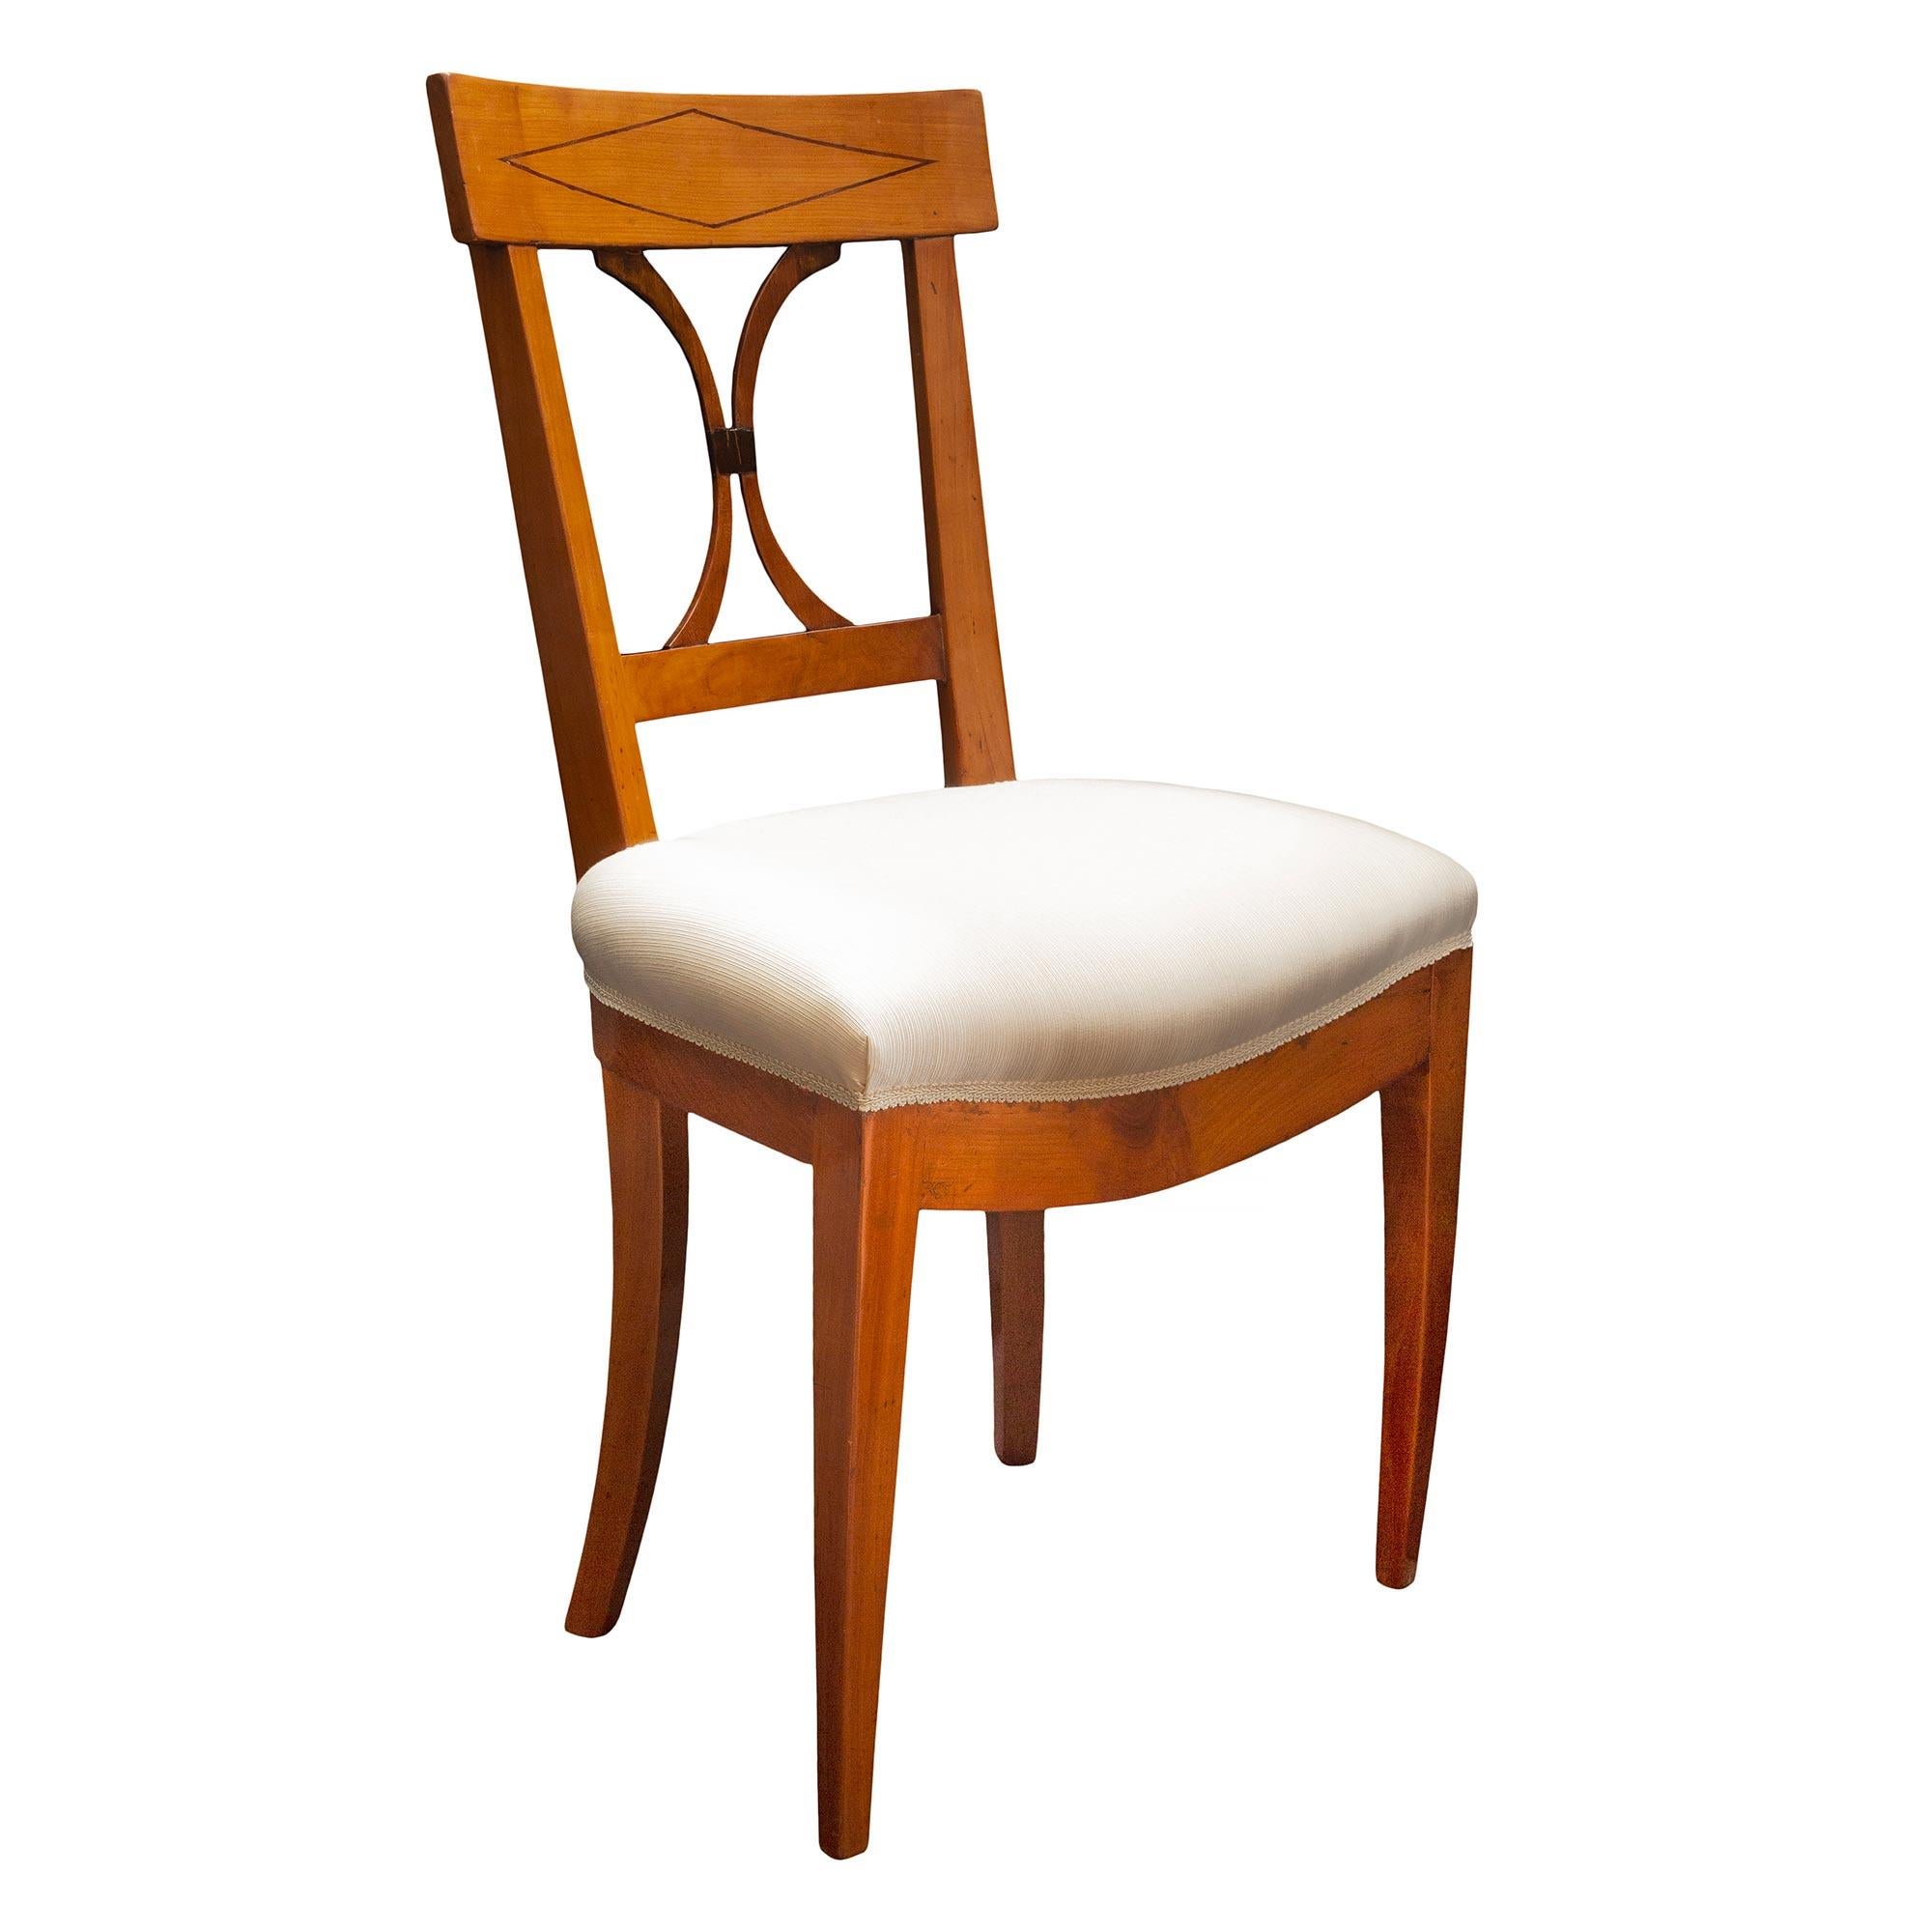 Pair of 19th Century French Directoire Style Cherrywood Chairs In Good Condition For Sale In West Palm Beach, FL